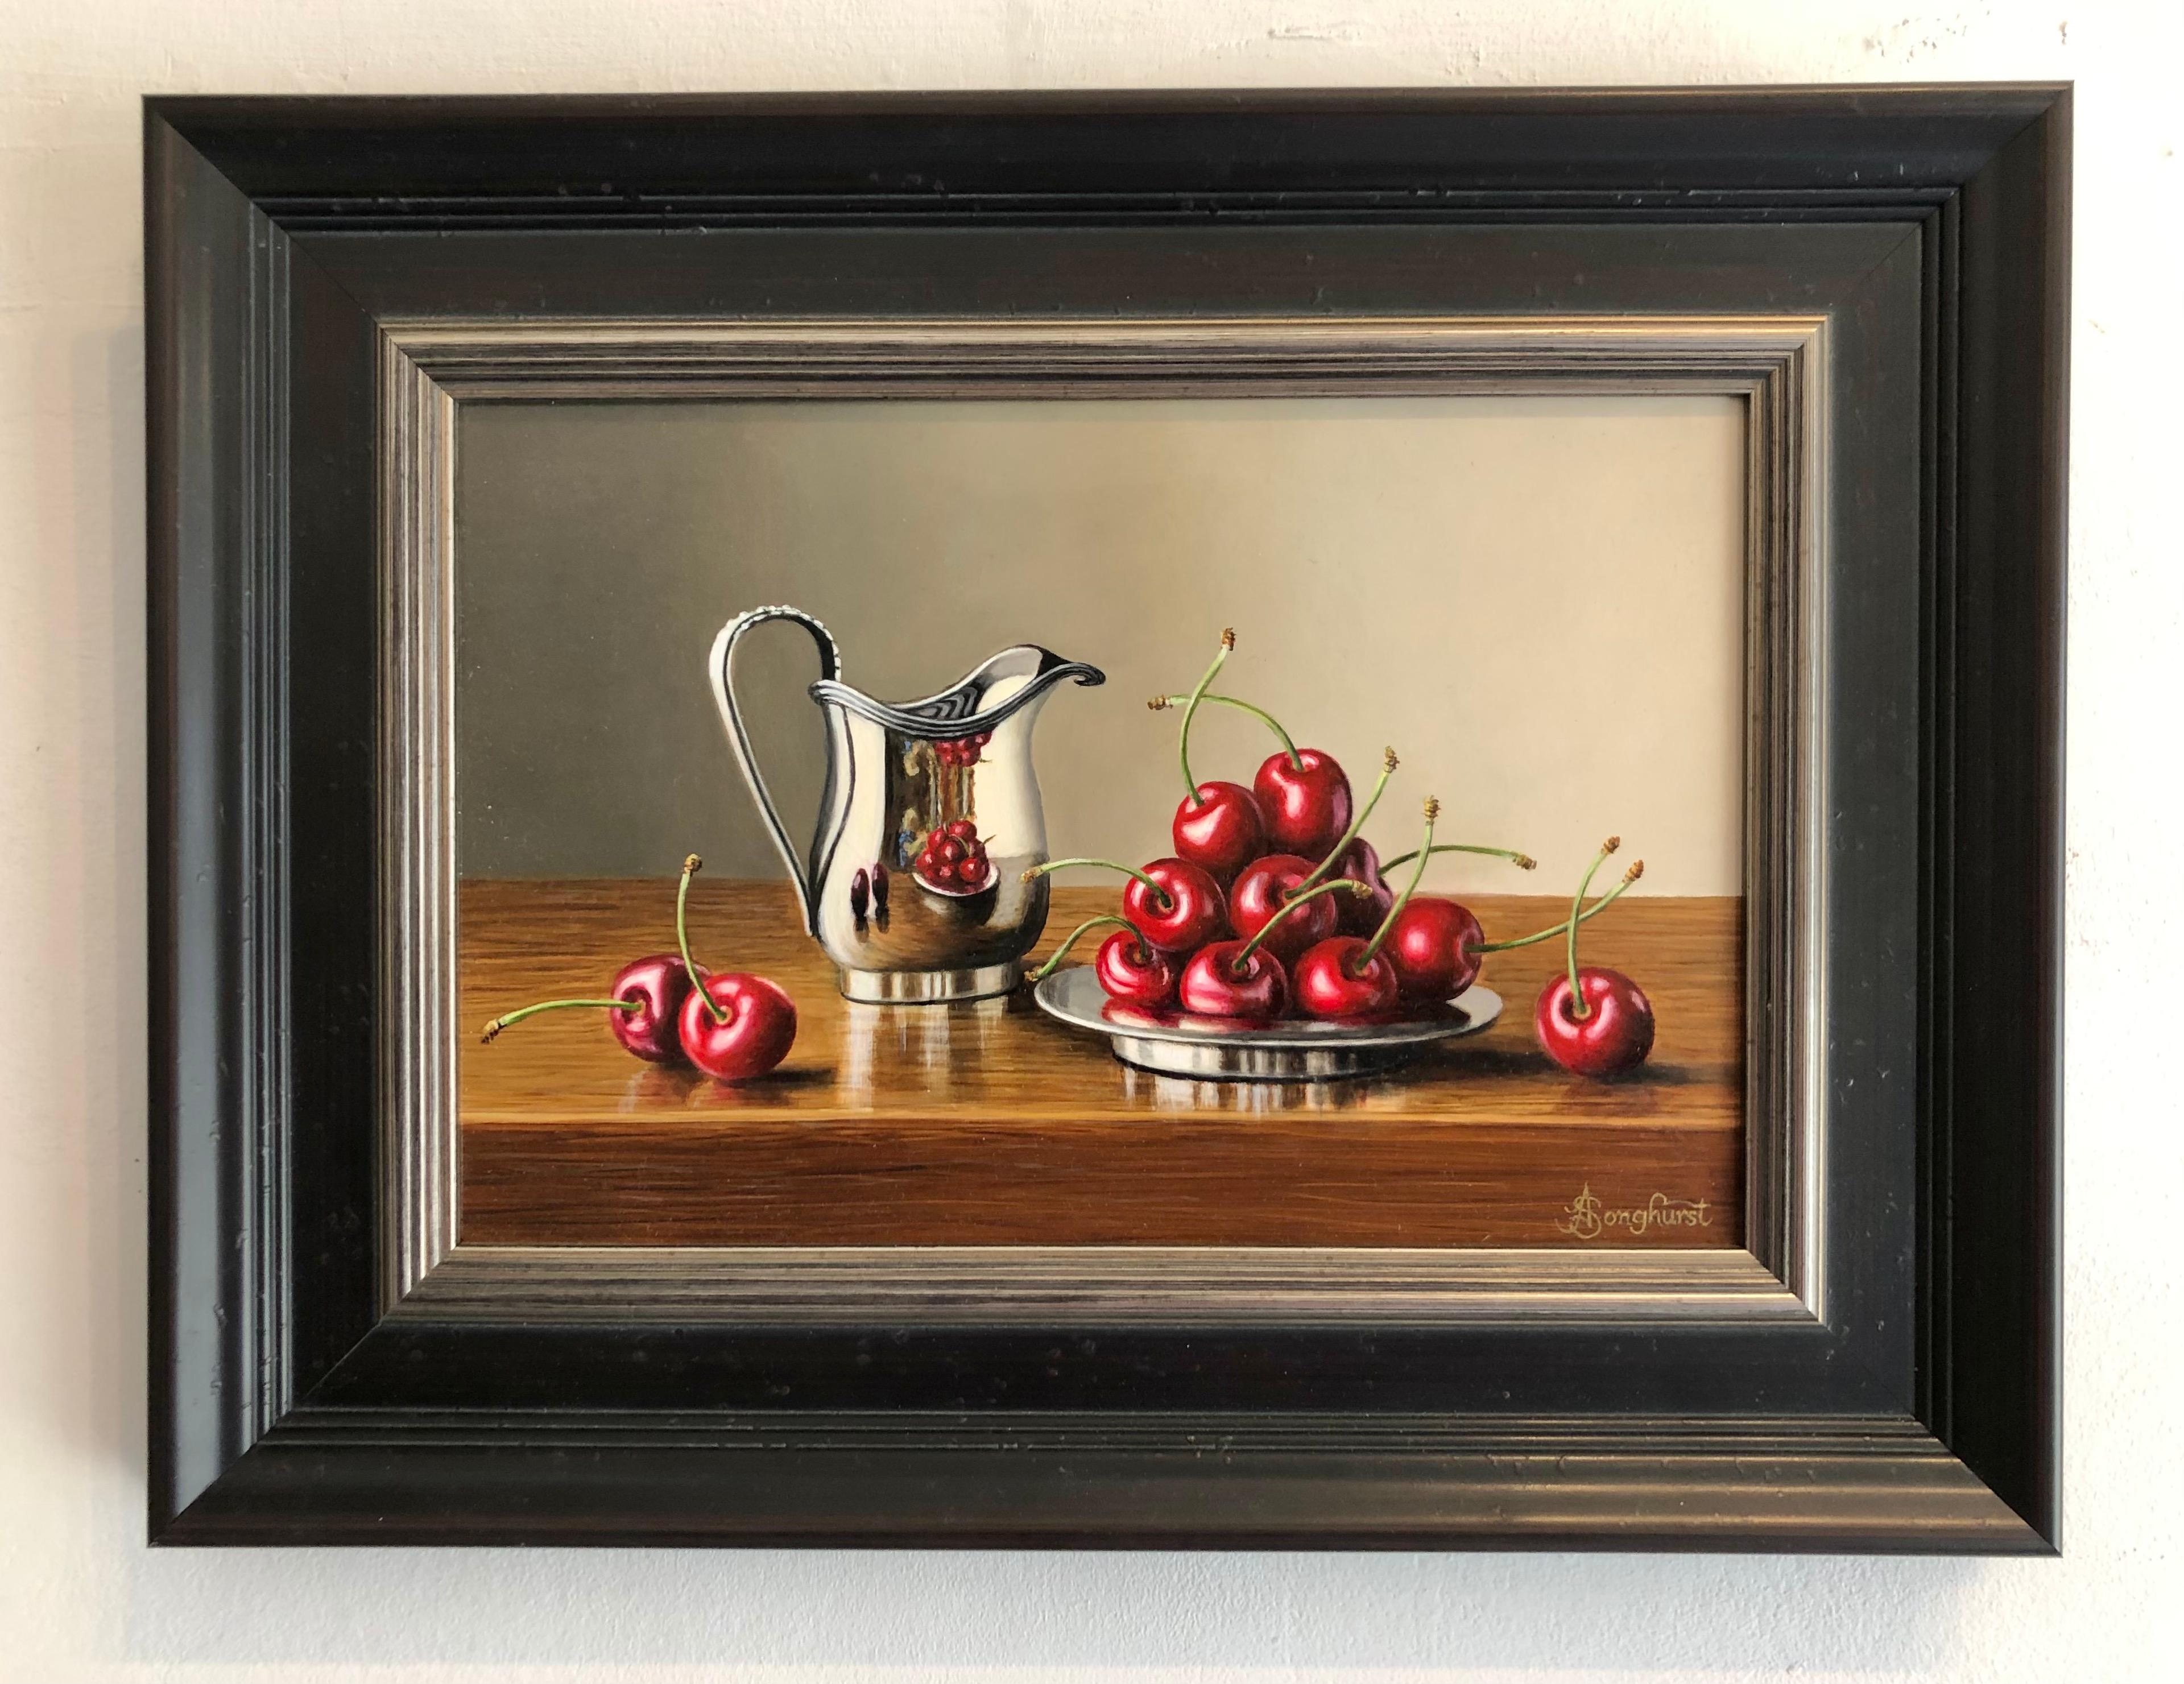 Silver Jug with Cherries -contemporary realism still life painting-FREE Shipping - Painting by Anne Songhurst